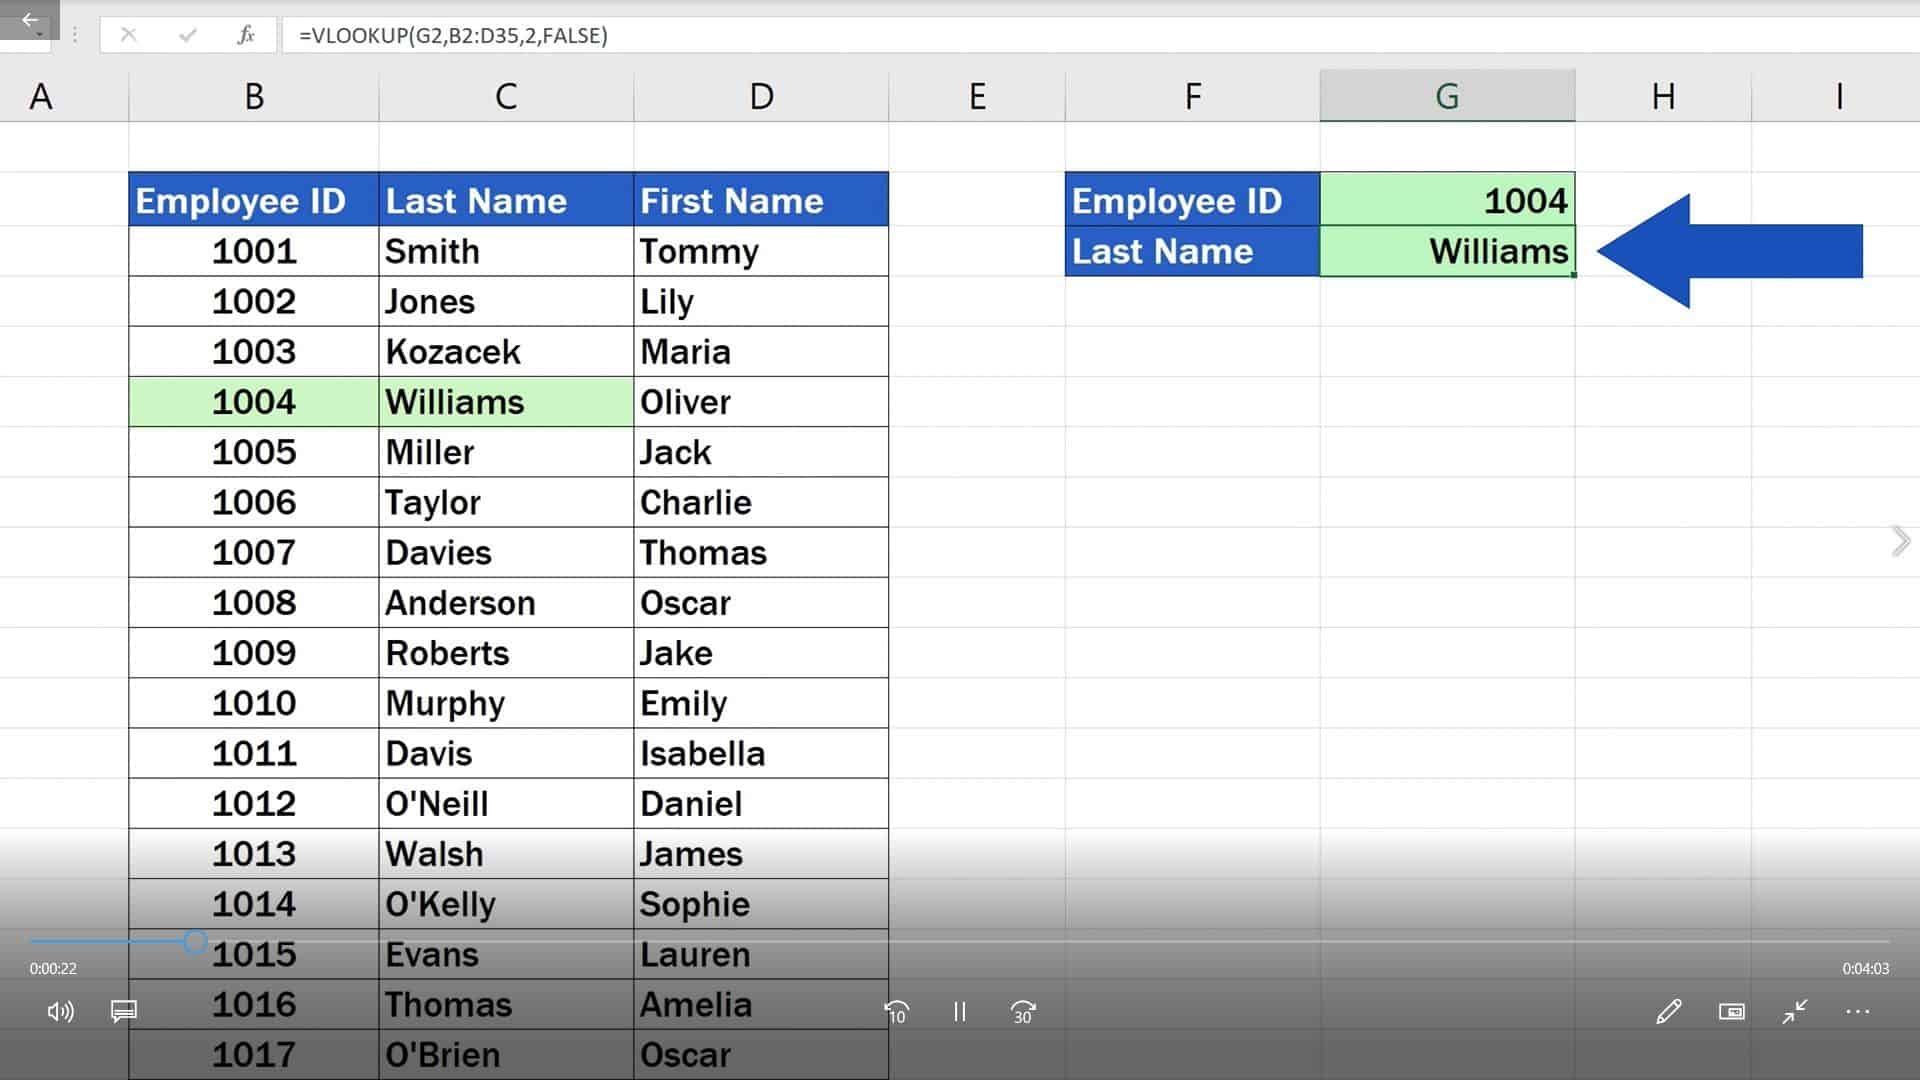 How To Use The Vlookup Function In Excel Step By Step - Riset